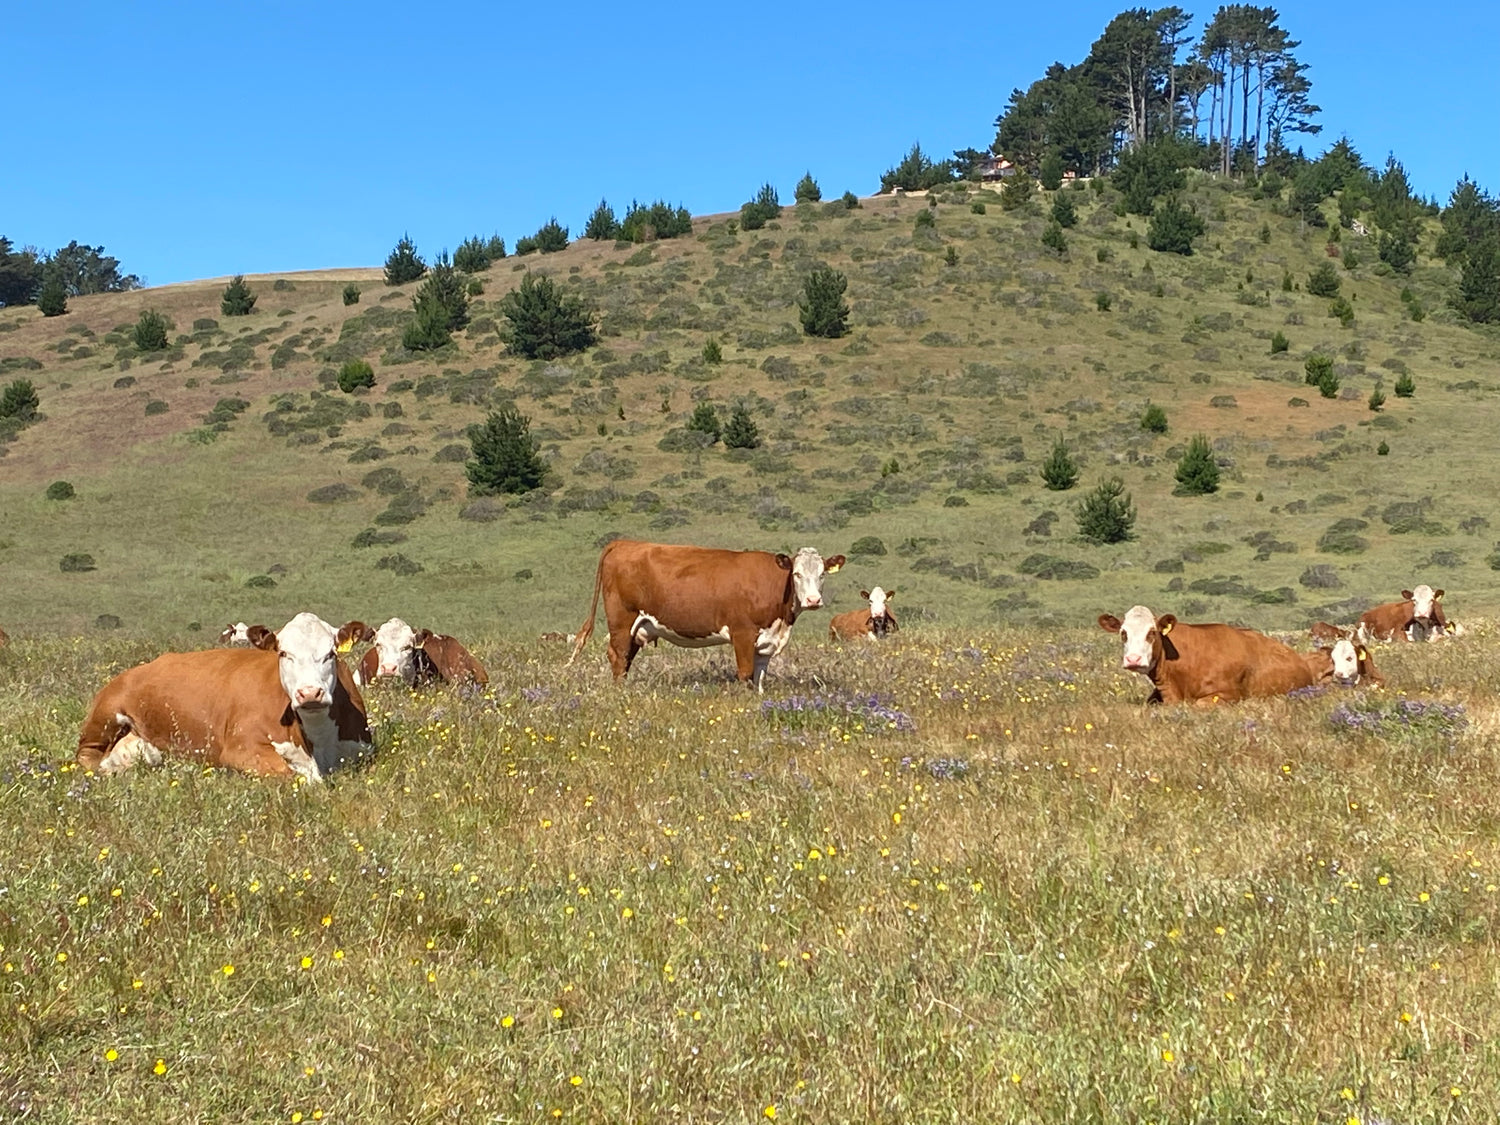 Mama cows relaxing on grassland